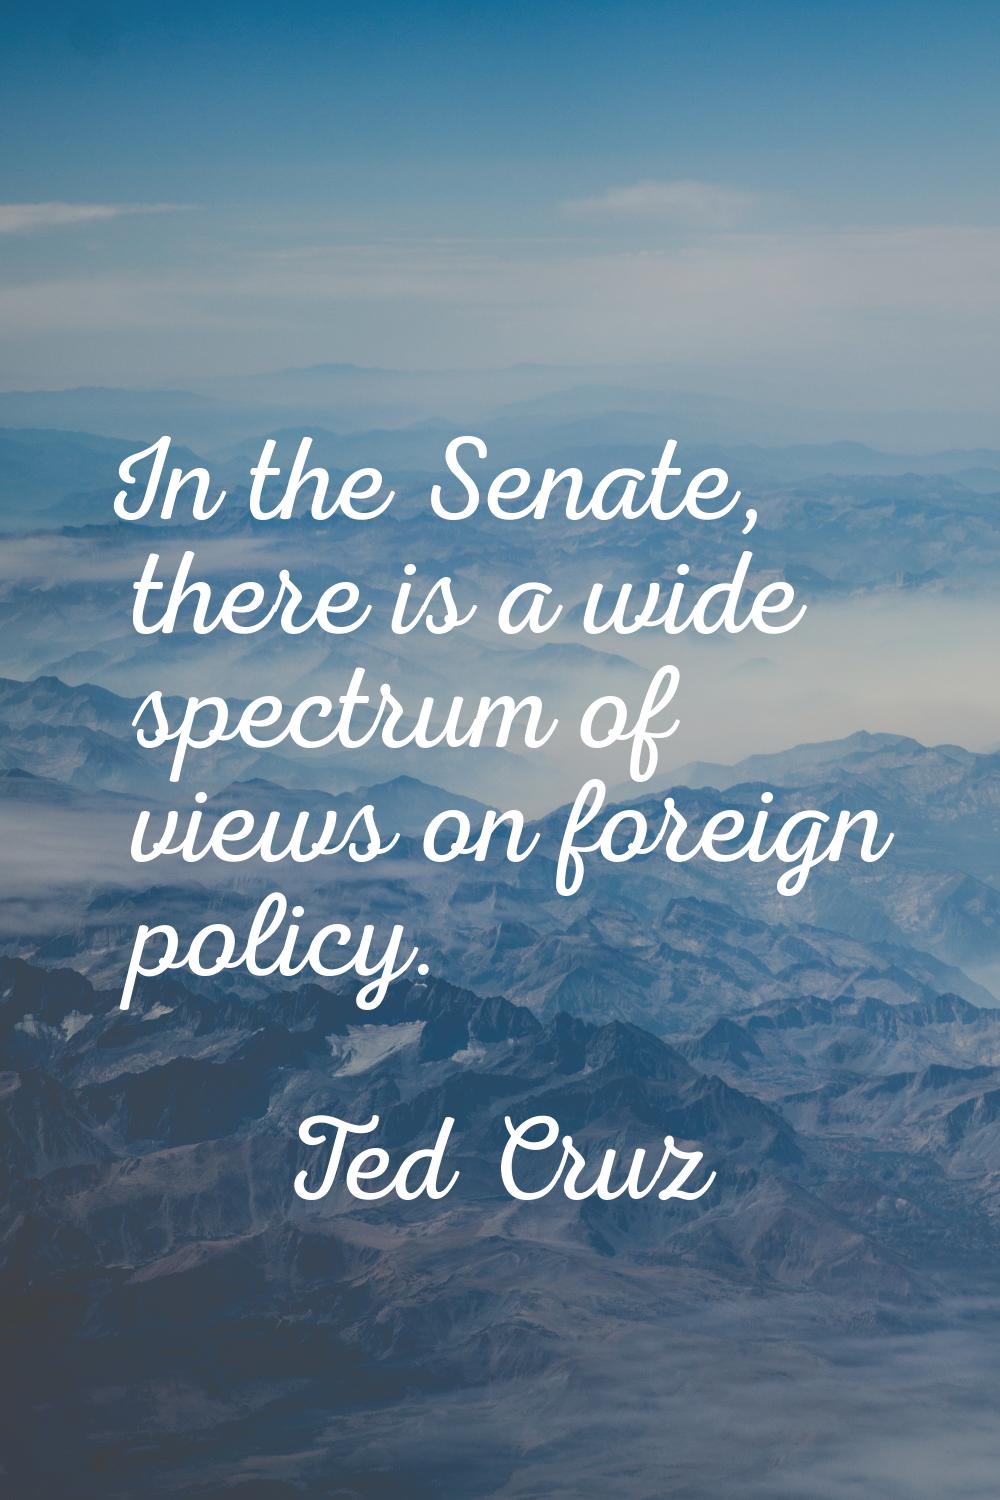 In the Senate, there is a wide spectrum of views on foreign policy.